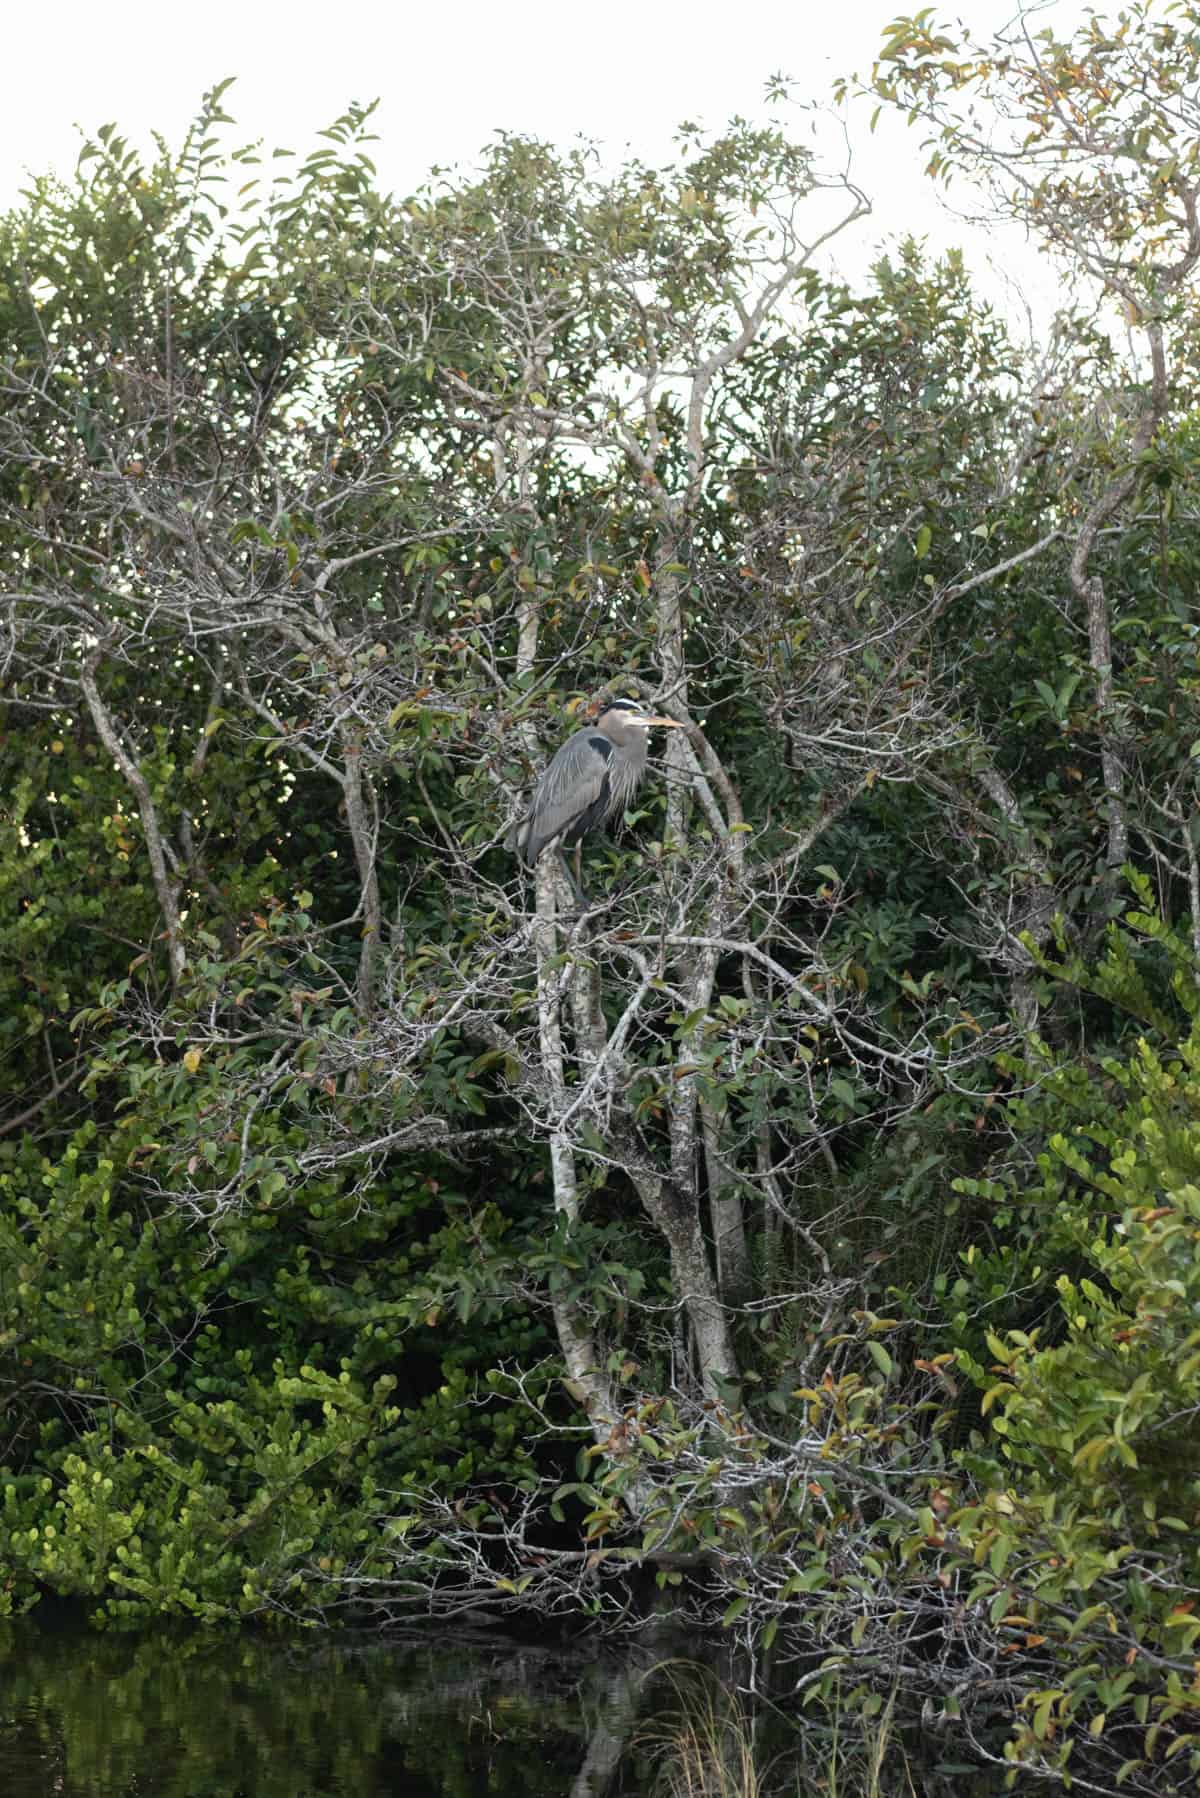 A bird in a tree at the Florida Everglades.